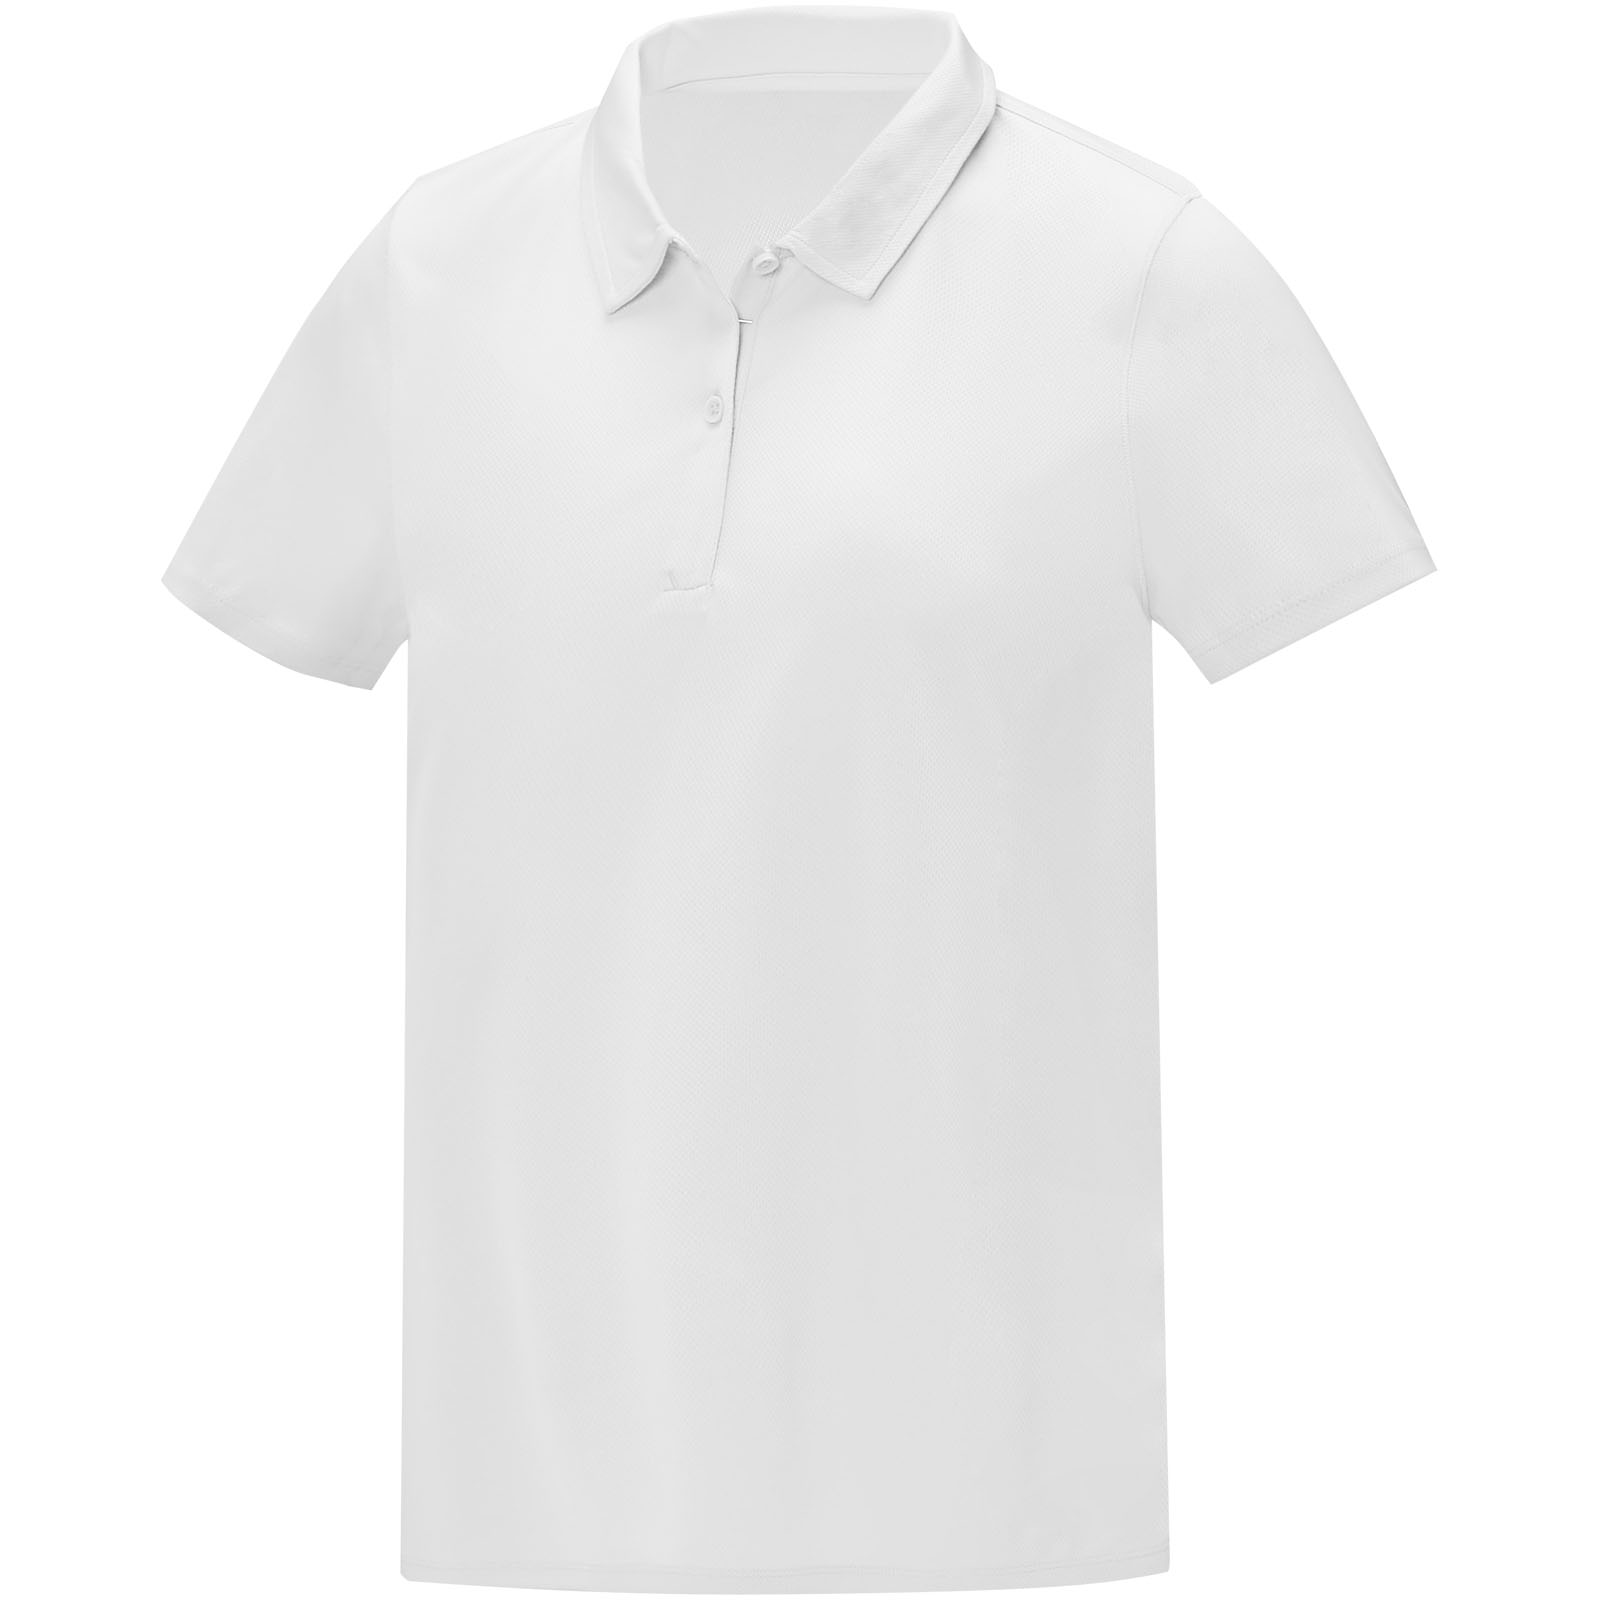 Clothing - Deimos short sleeve women's cool fit polo